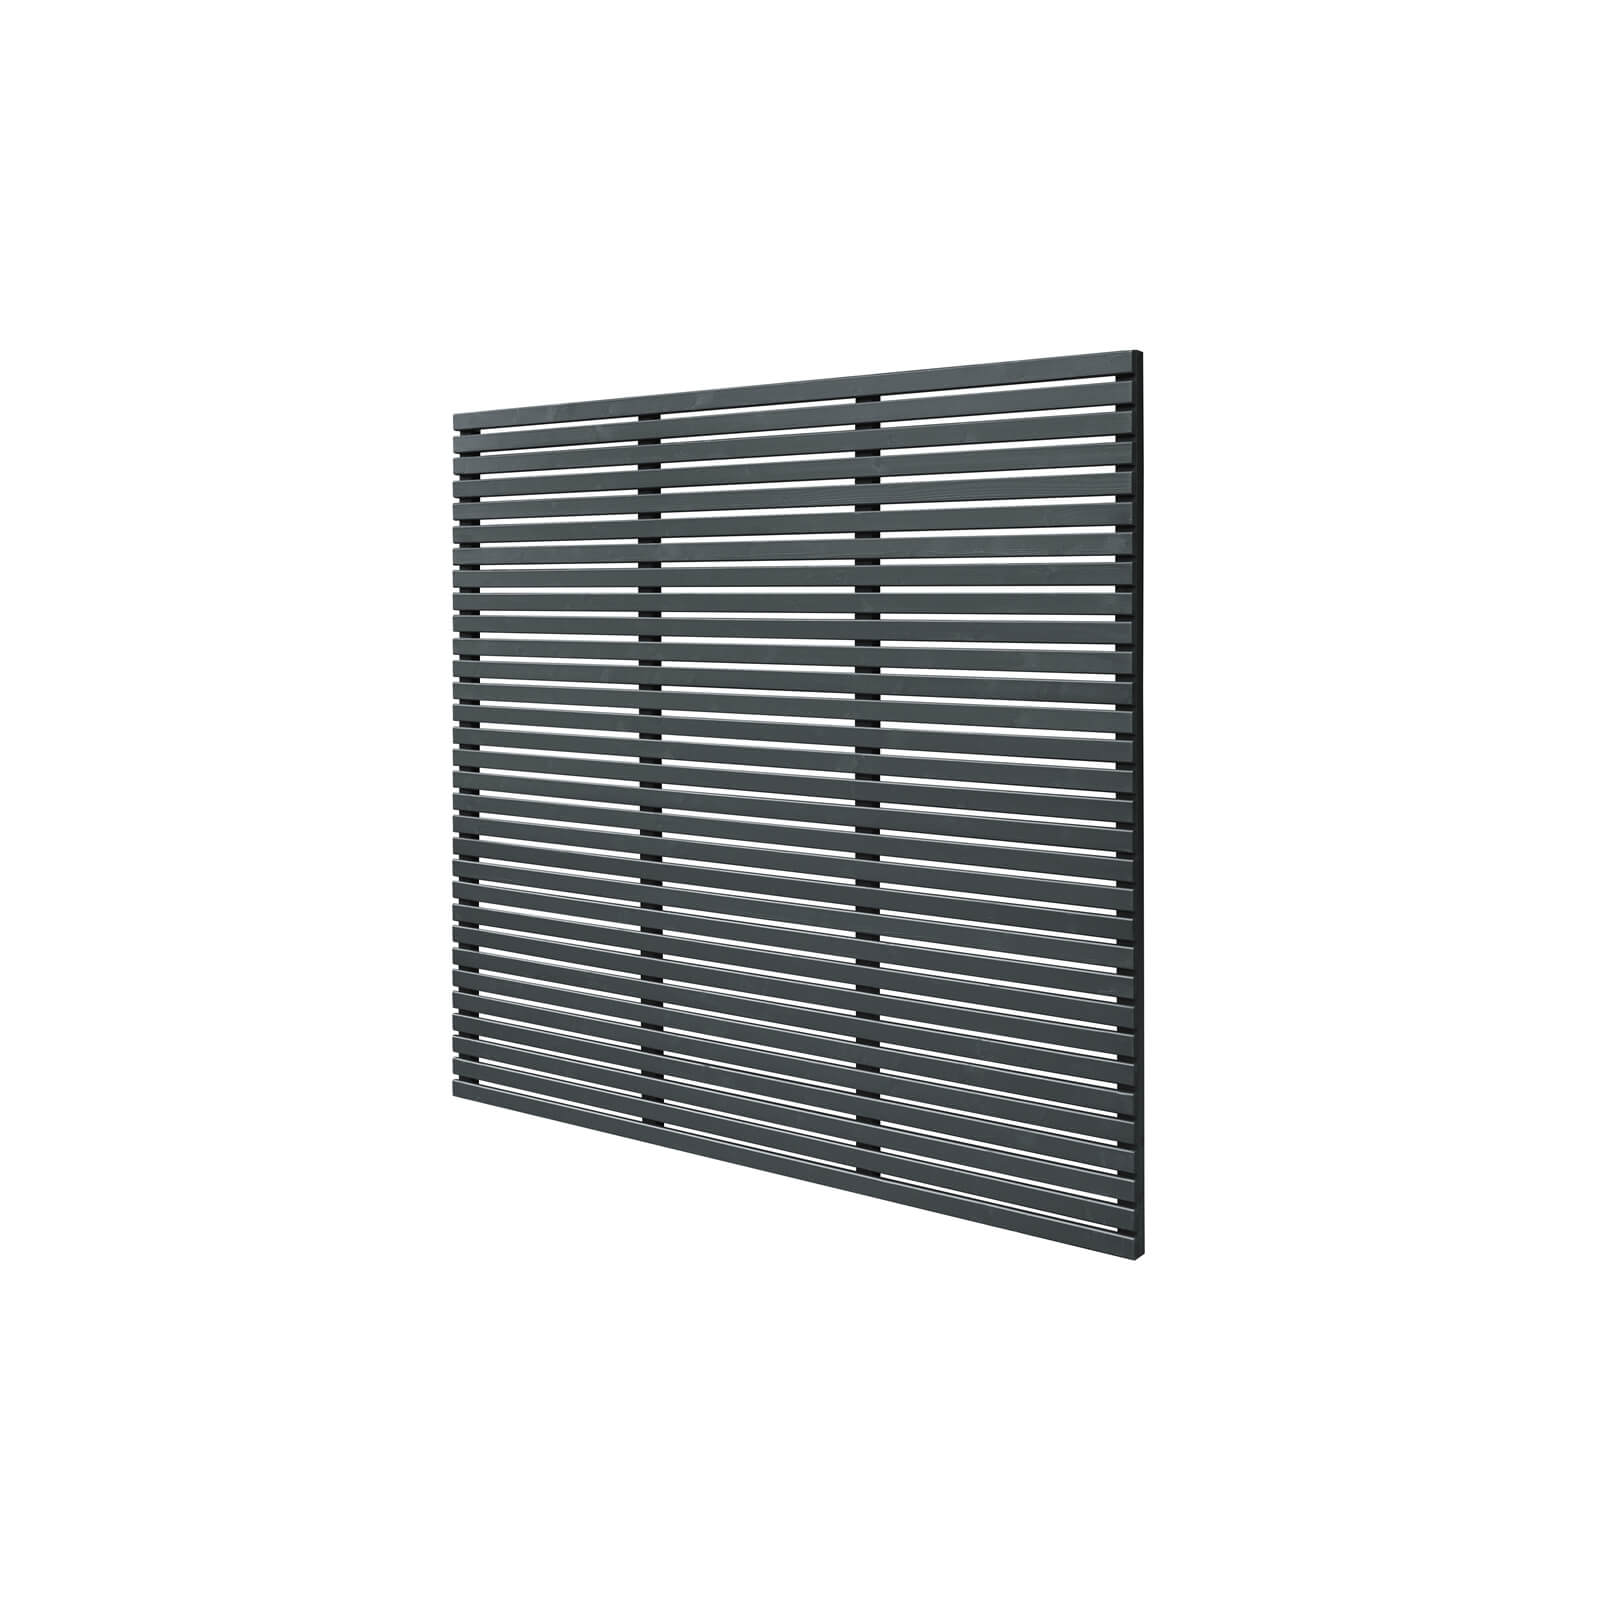 6ft x 6ft (1.8m x 1.8m) Grey Painted Contemporary Slatted Fence Panel - Pack of 4